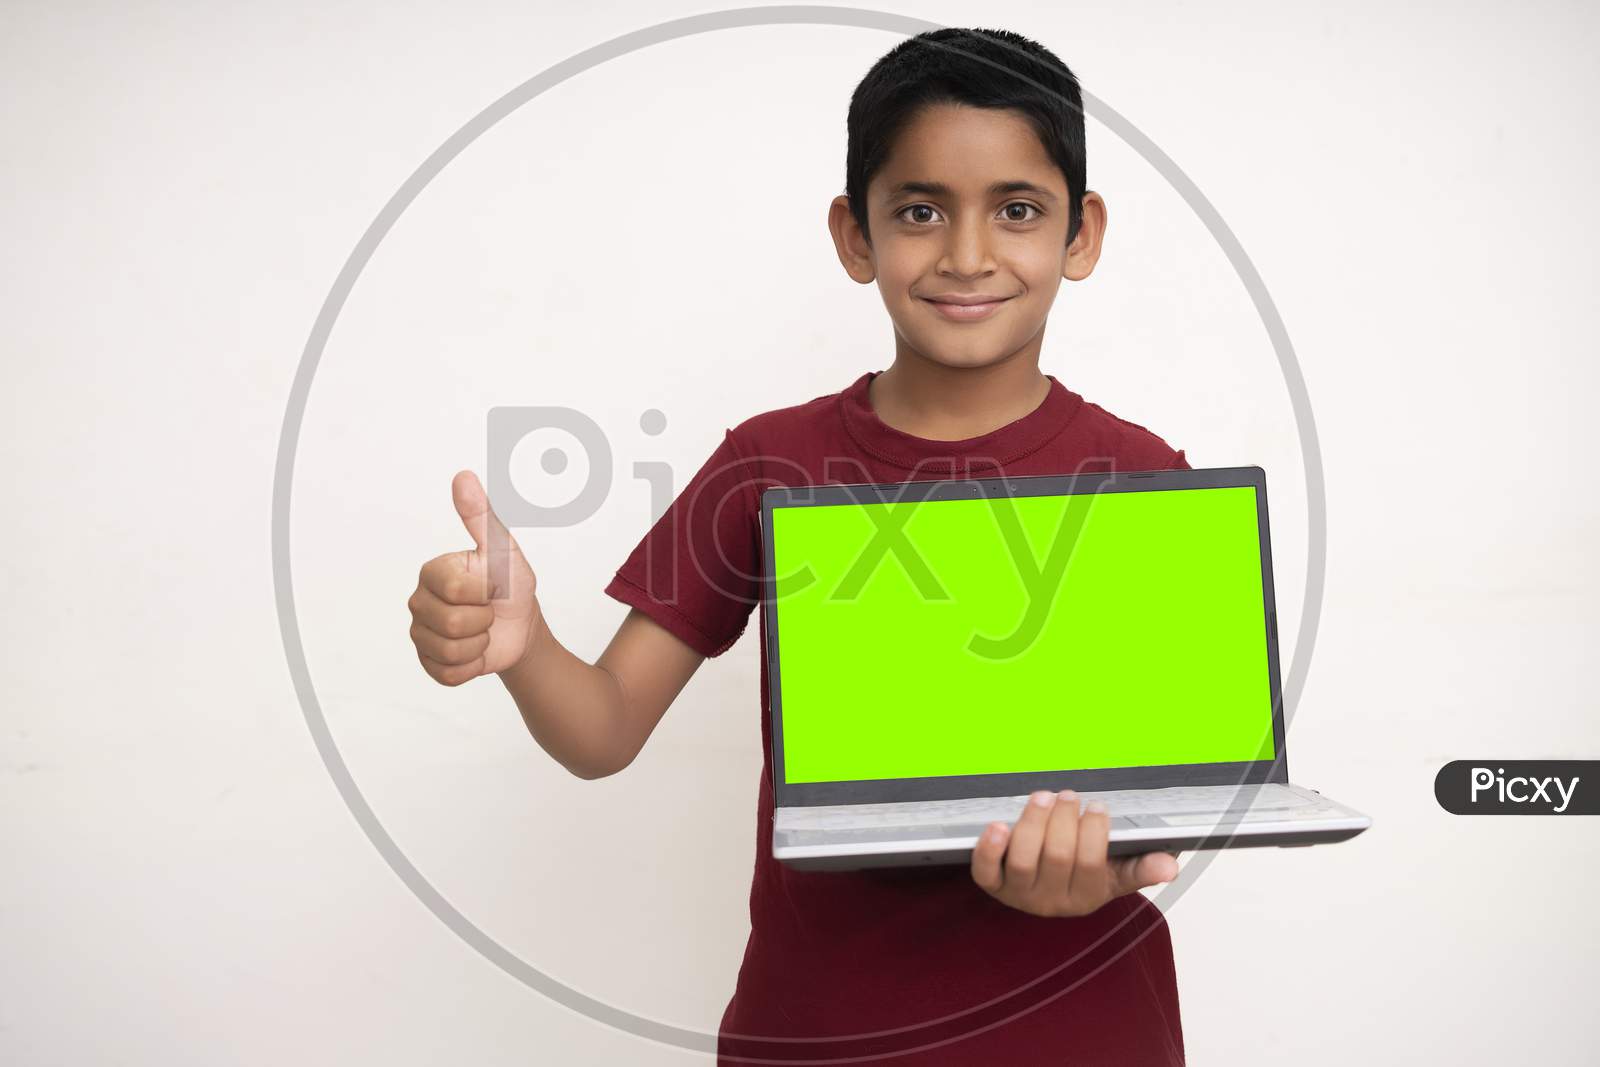 Young Indian Kid Holding A Laptop With Green Screen In His Hands And Showing Thumbs Up To The Camera. Standing On A White Isolated Wall With Copy Space.